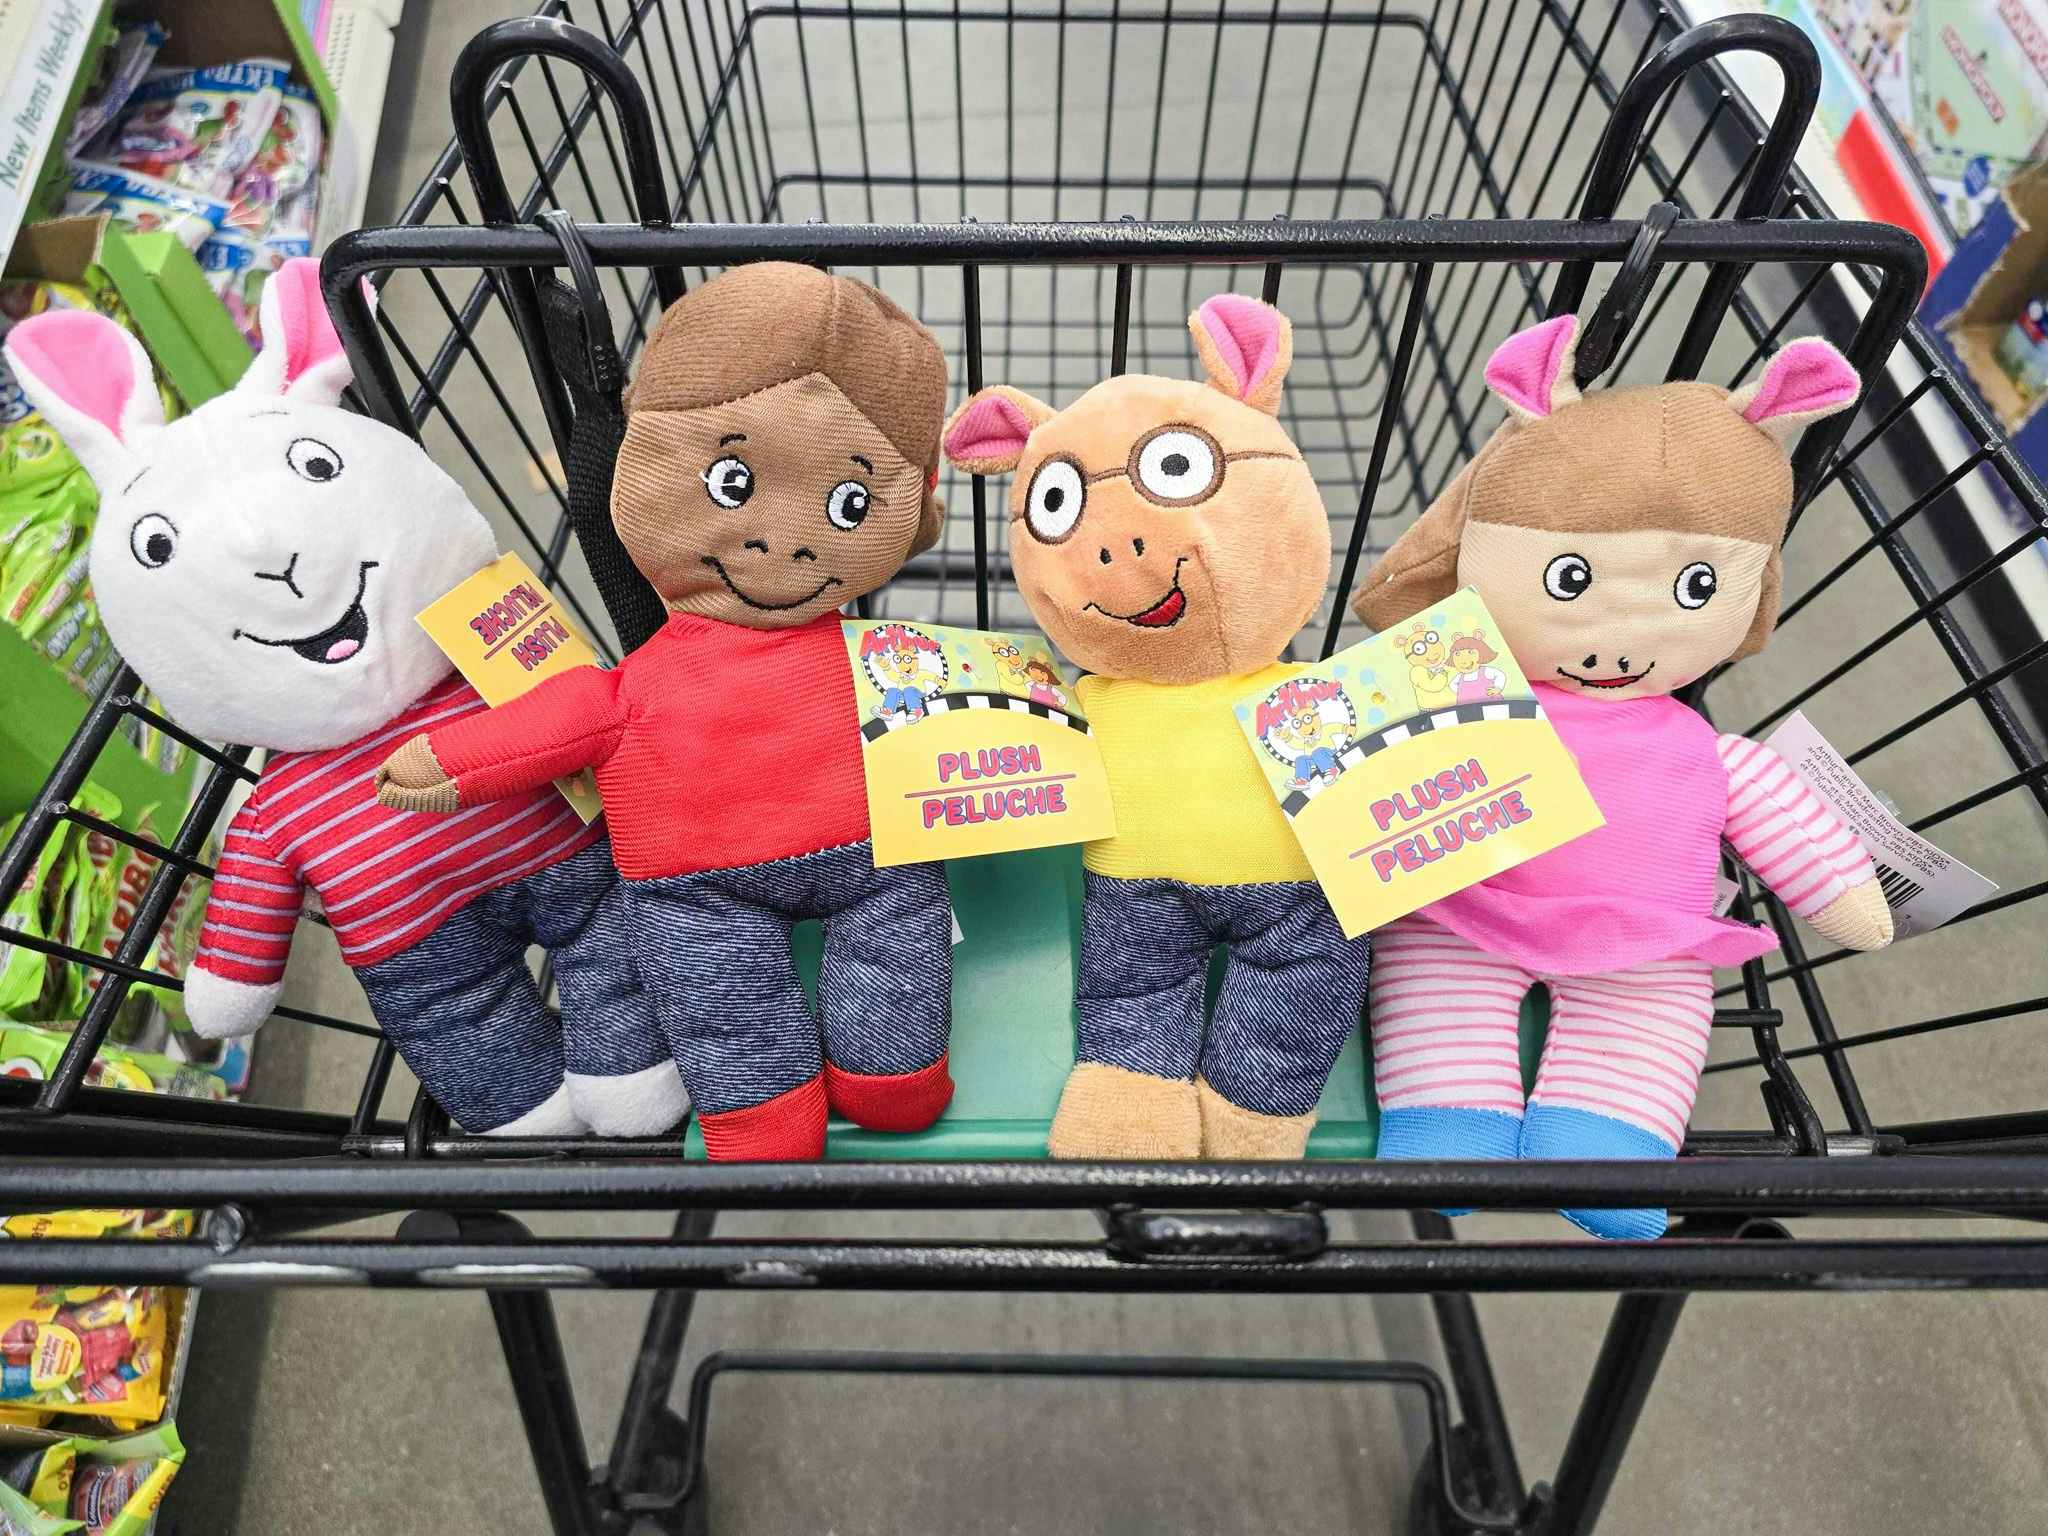 4 arthur plushes in a cart